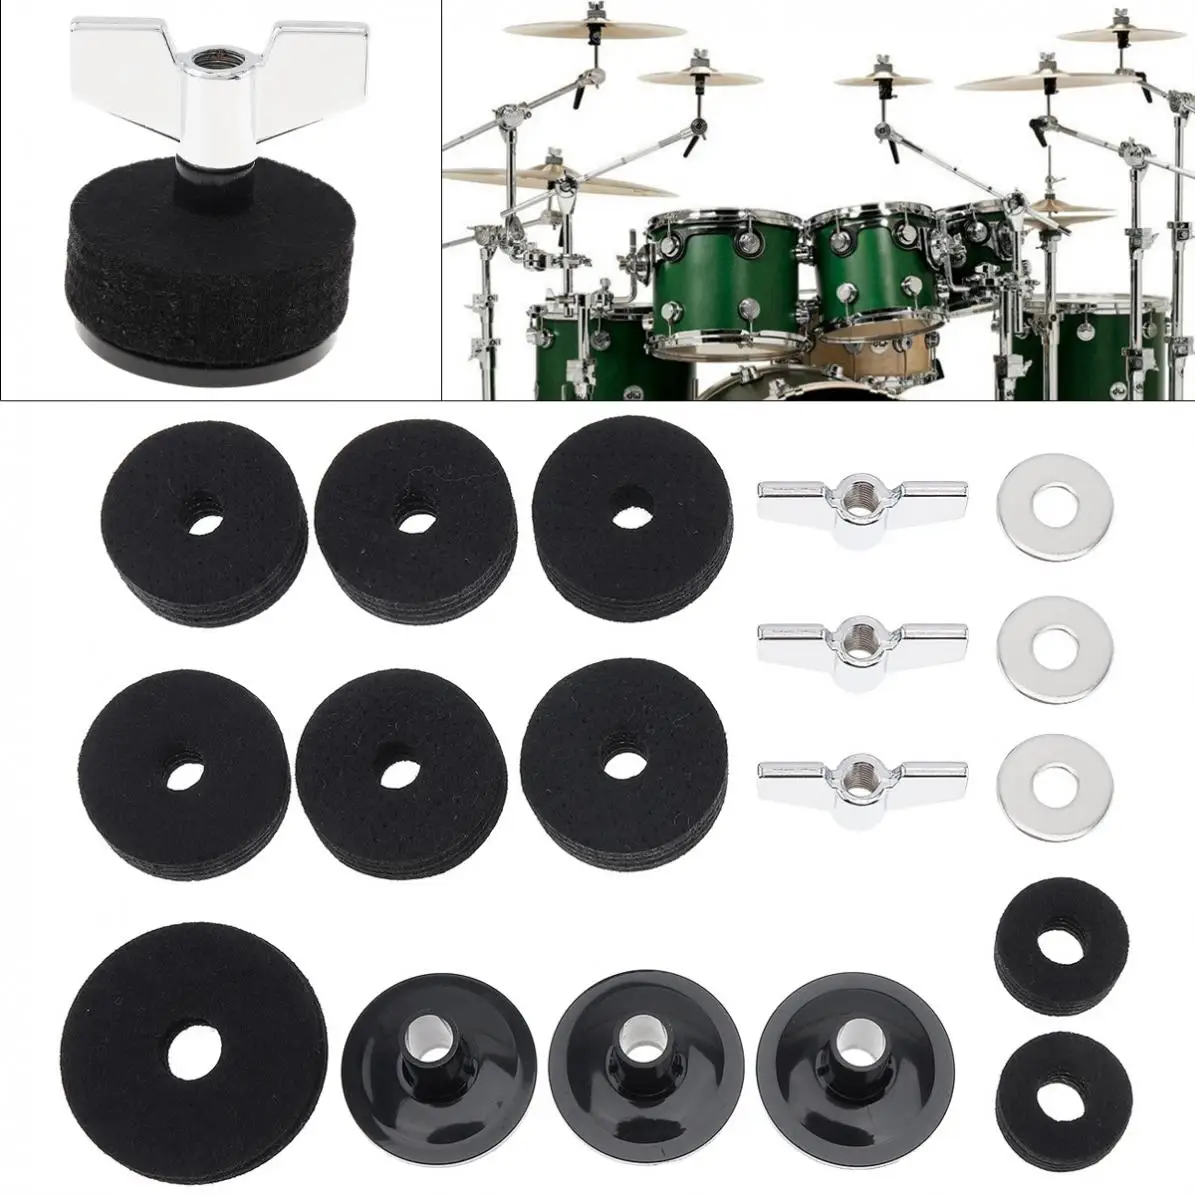 

18pcs Jazz Drum Cymbal Felt Pads Parts Replacement Kits with Cymbal Sleeves & Washers & Wing Nuts & Wool Felt Pads